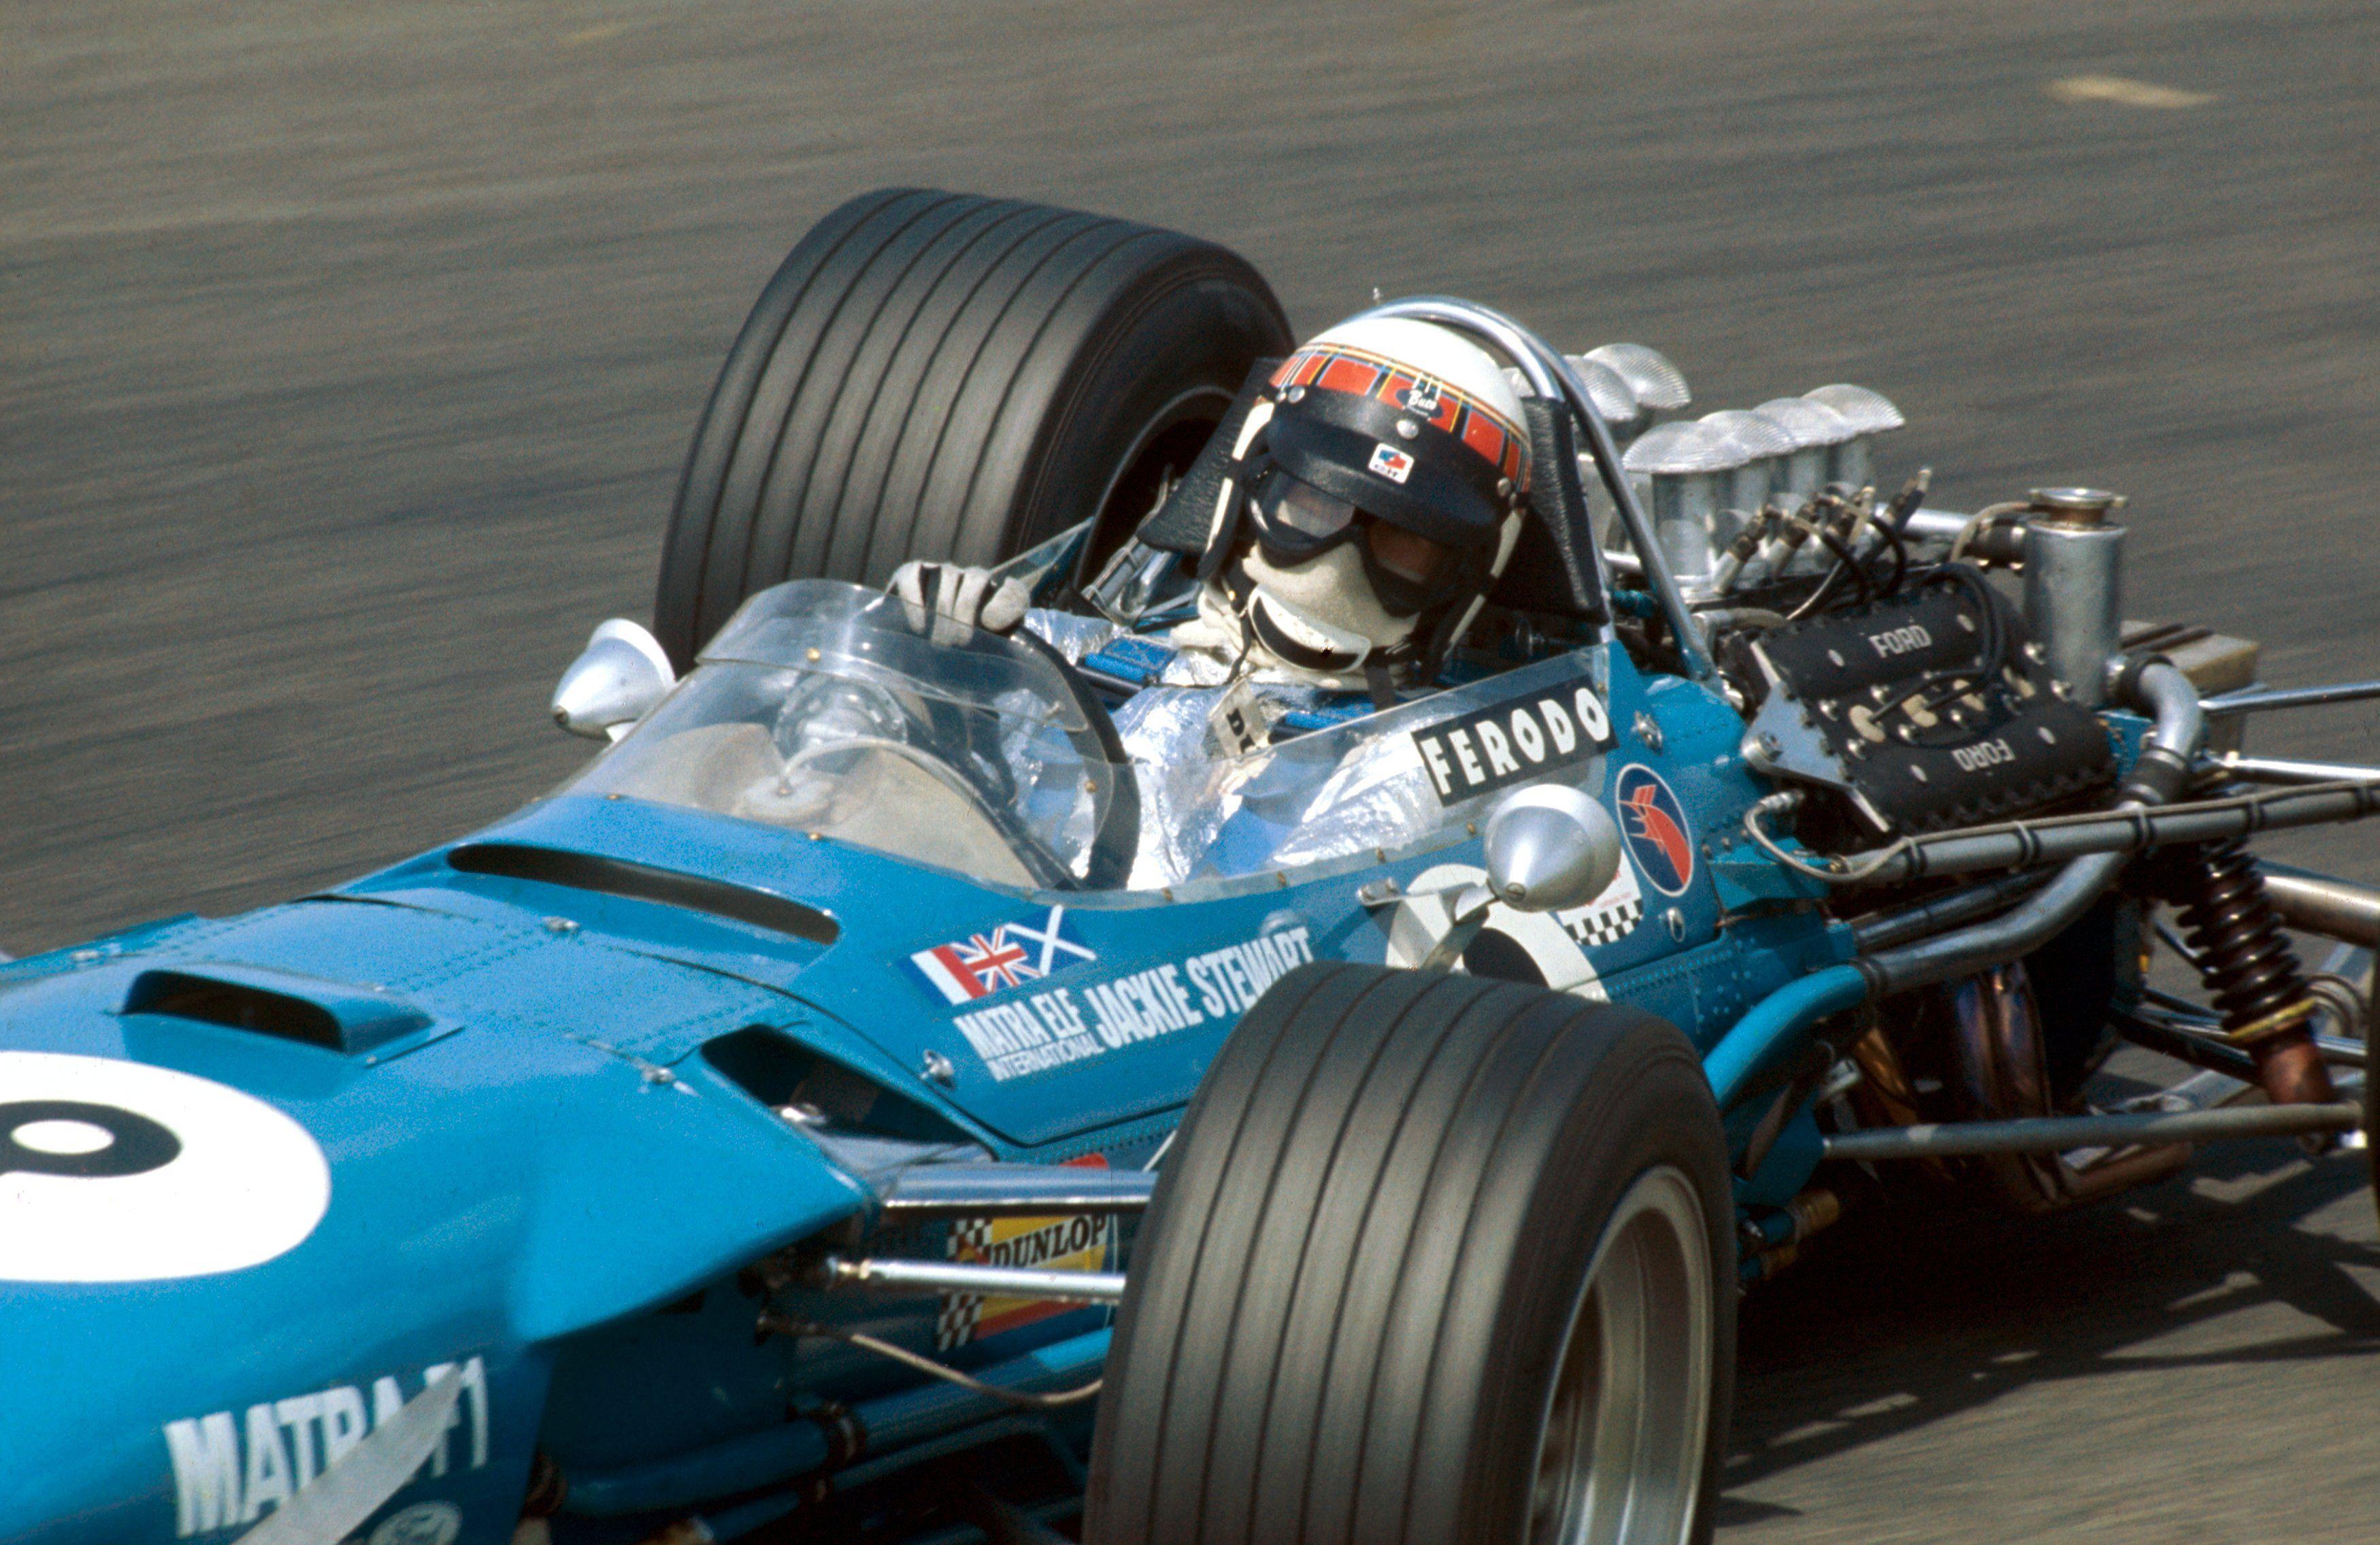 Vintage f1 Stock Photos Royalty Free Vintage f1 Images  Depositphotos